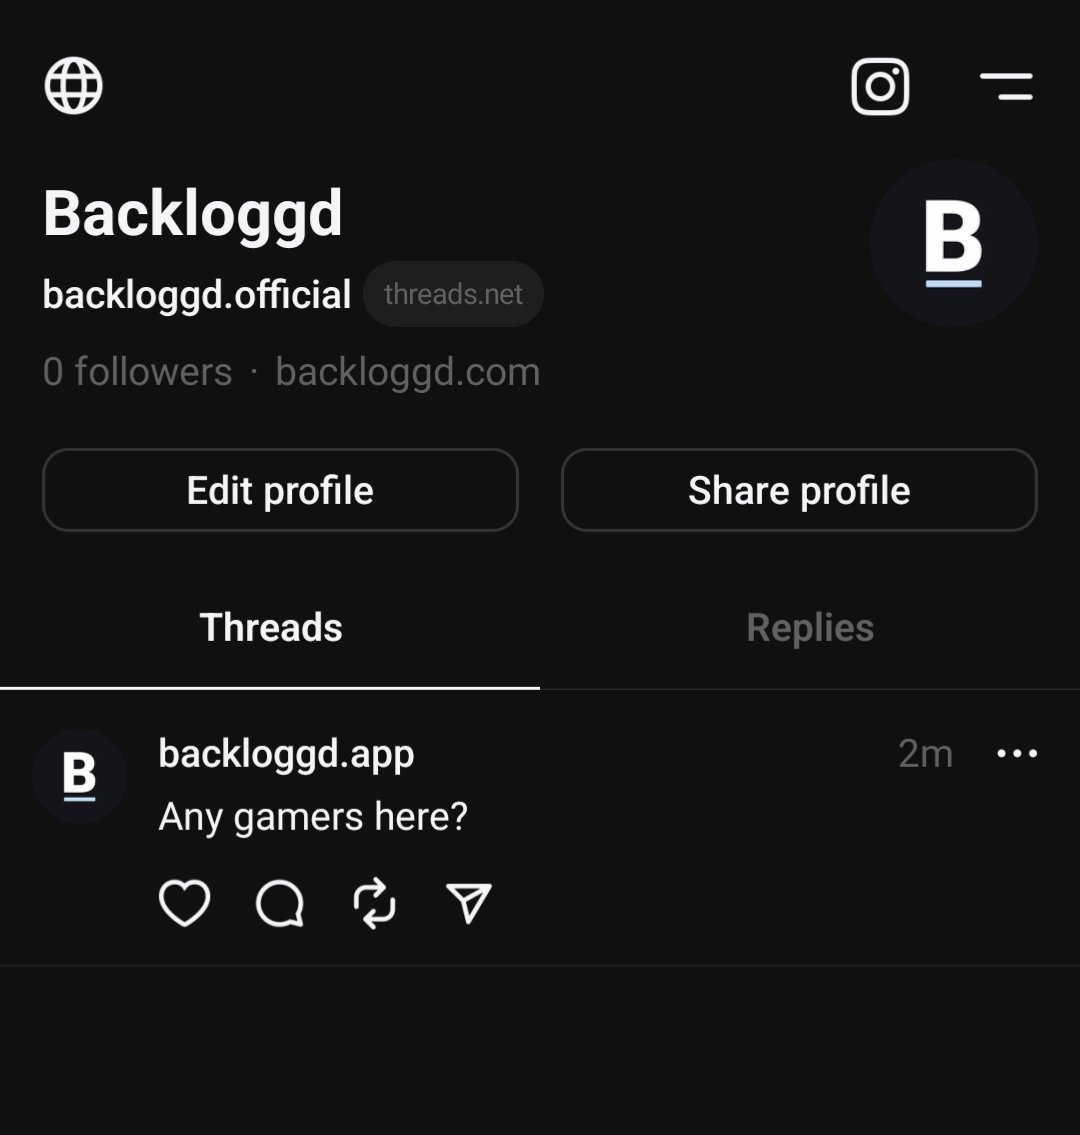 Backloggd - A Video Game Collection Tracker